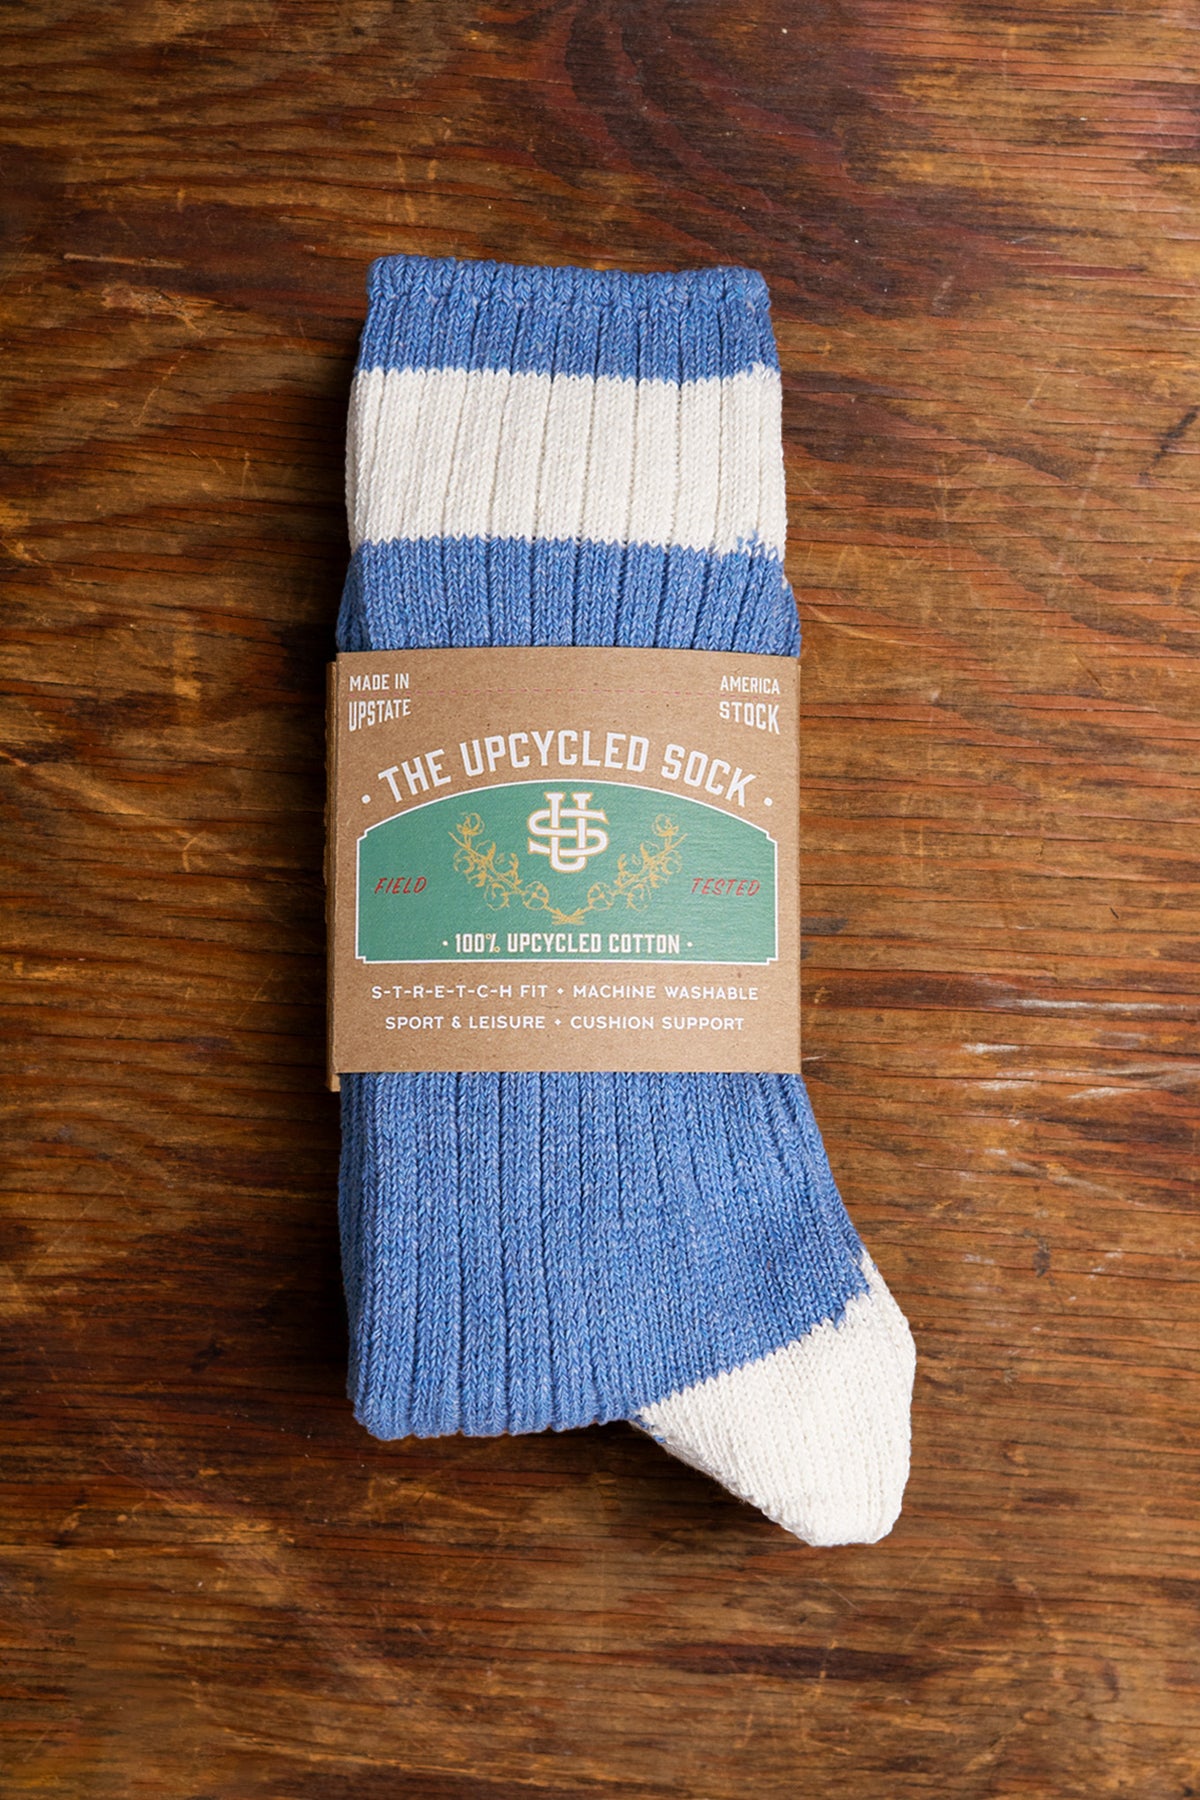 NEW The Upcycled Sock - Cerulean Blue